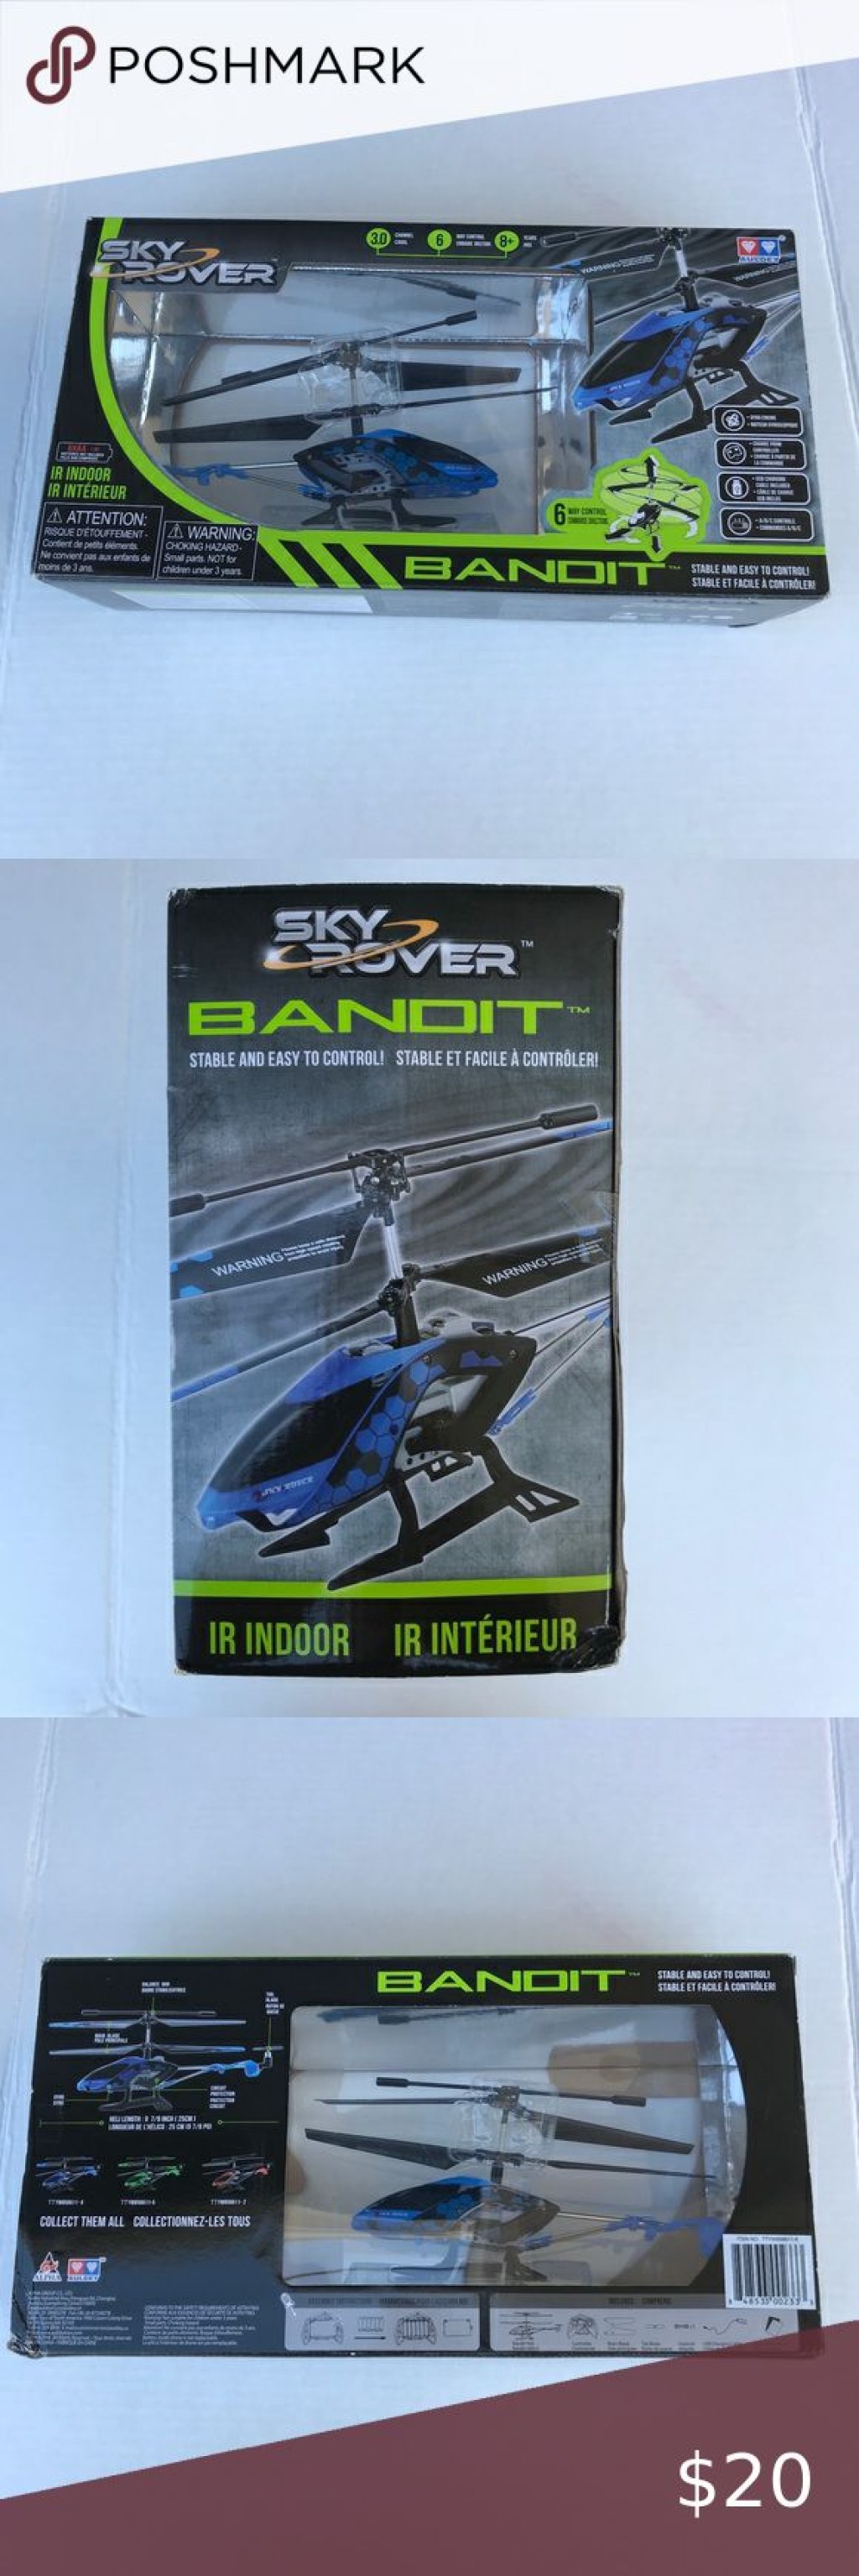 Picture of: Sky Rover Bandit Helicopter Shop, Save %  jlcatj.gob